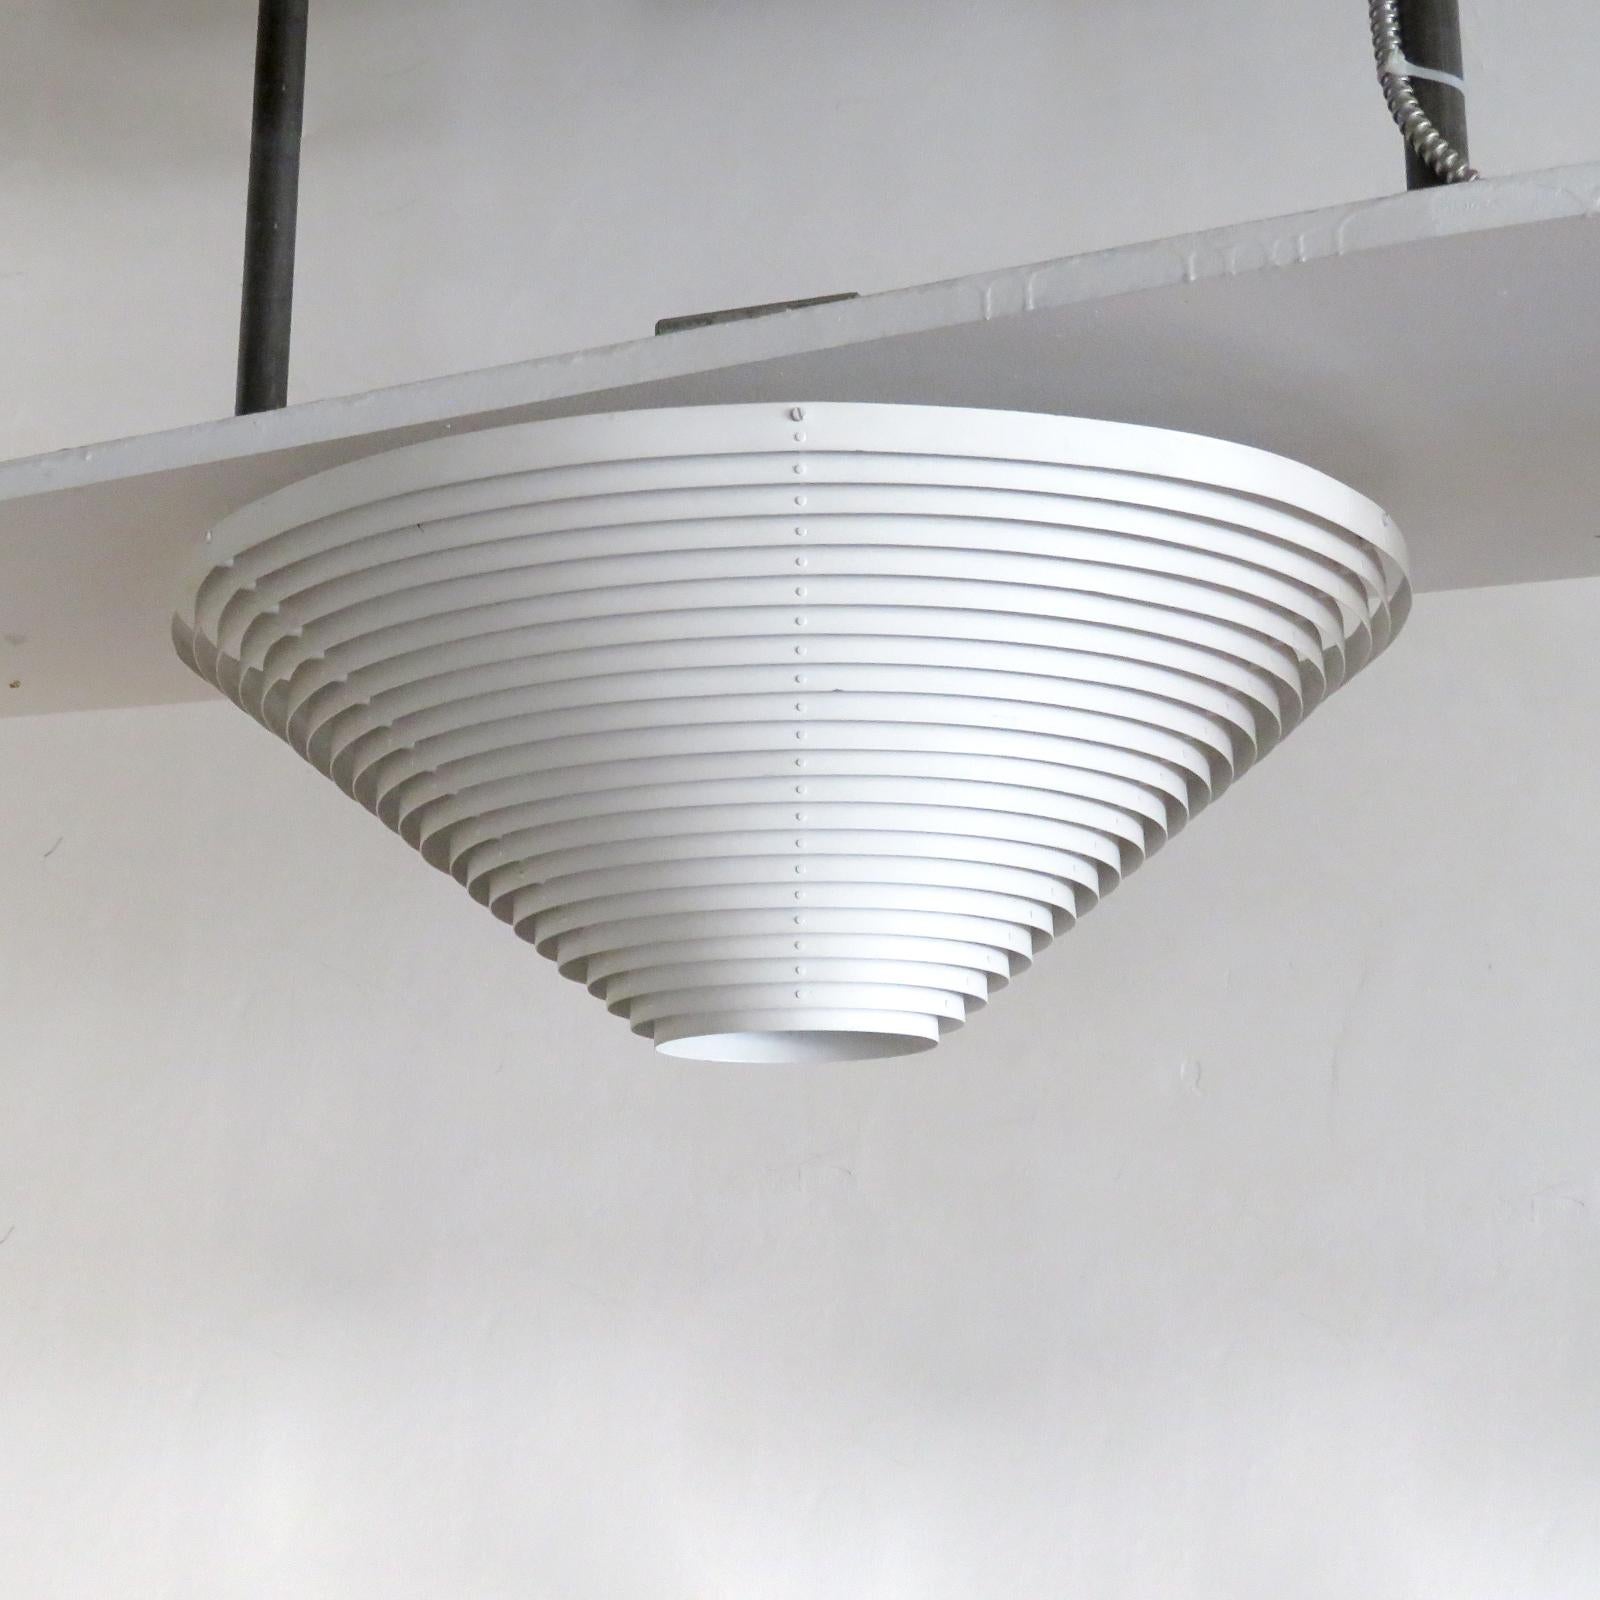 Wonderful model 'A622A' ceiling lamp by Alvar Aalto for Valaisinpaja Oy, Finland, originally designed for the National Pensions building in Helsinki, made of louvered, white lacquered steel rings with central glass diffusor, three E26 sockets, max.